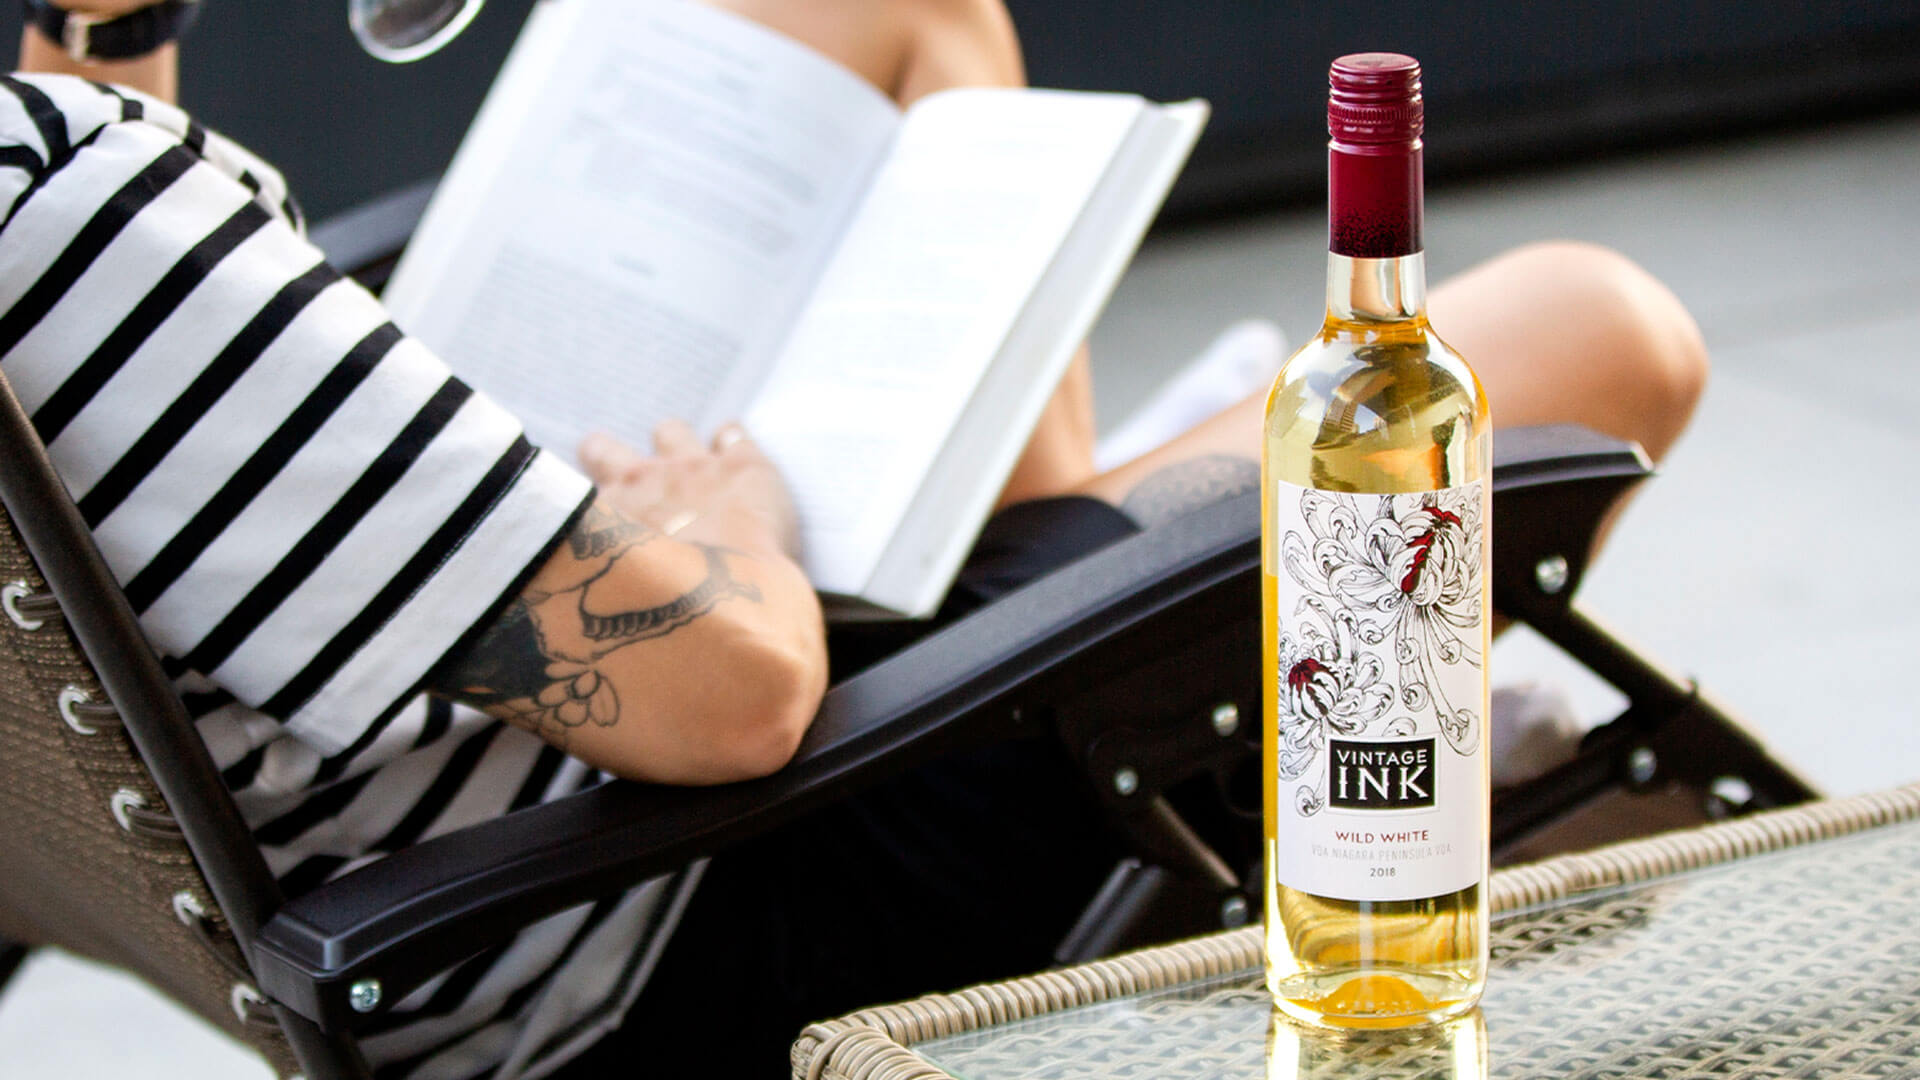 Vintage Ink Wild White 2018 wine bottle on table with wine lover reading a book. 